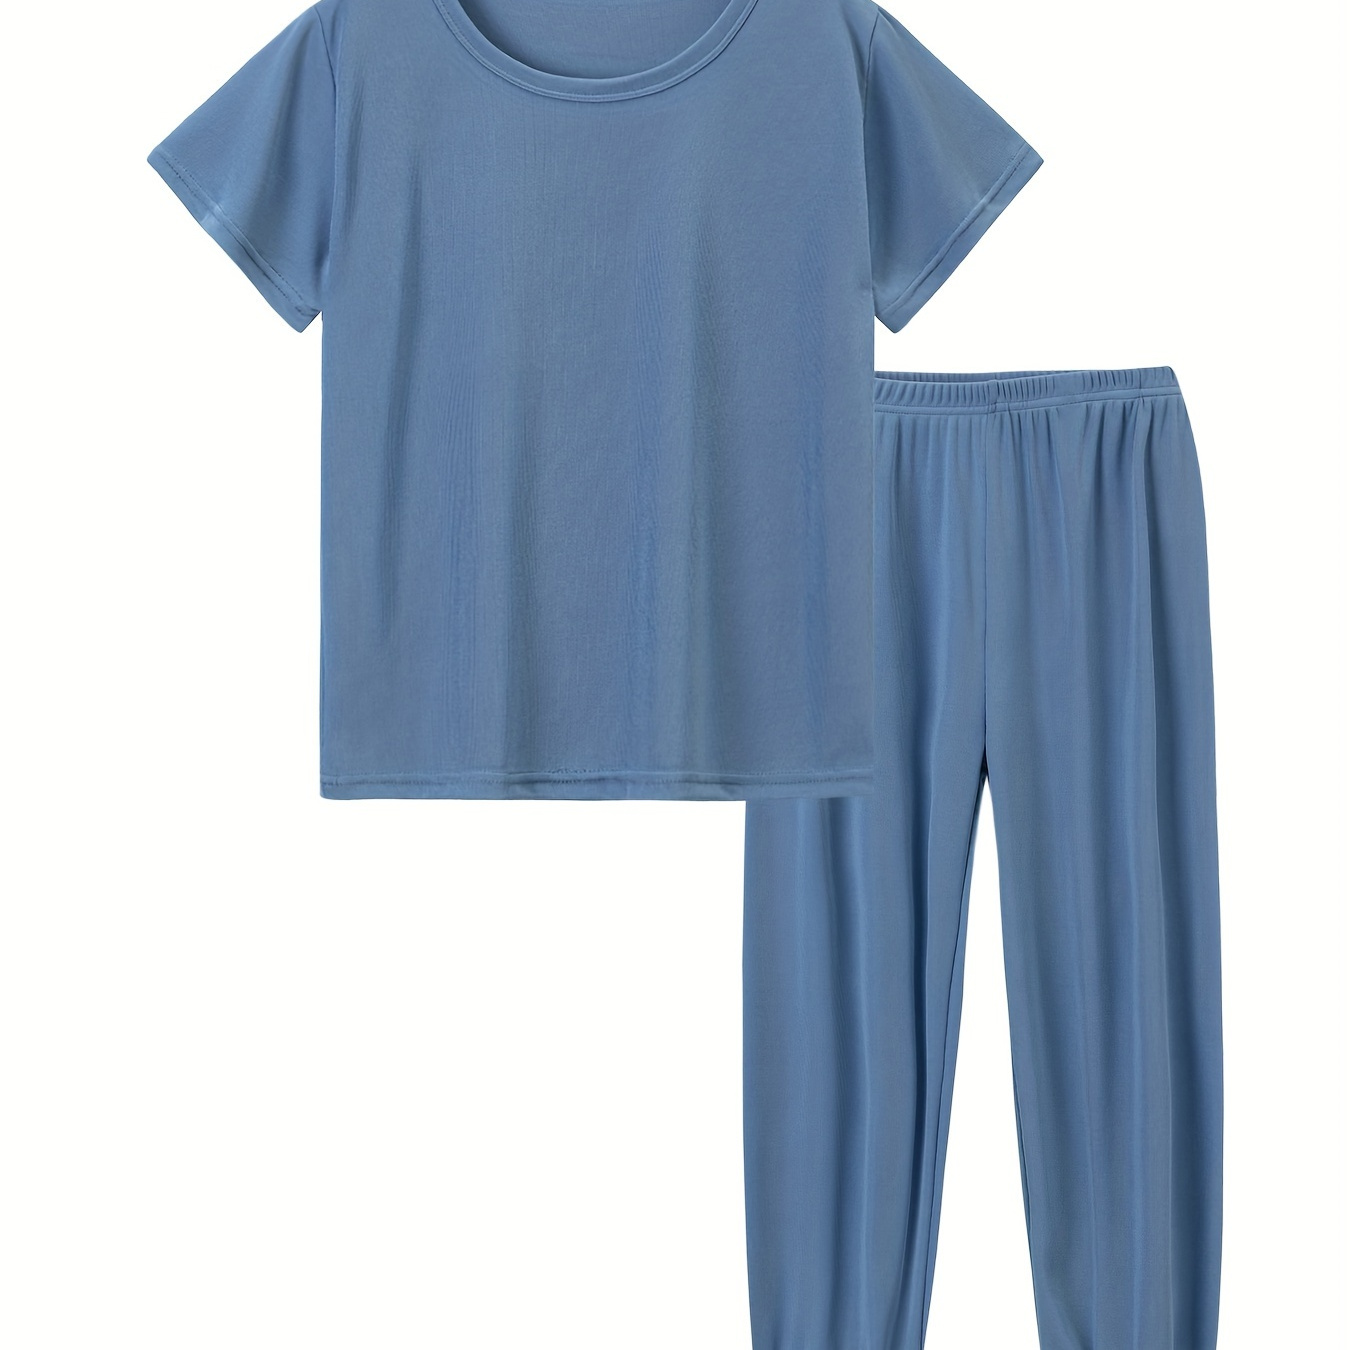 

Boys 2-piece Trendy Pajama Sets Solid Color Round Neck Short Sleeve Top & Matching Pants Comfy Casual Pj Sets